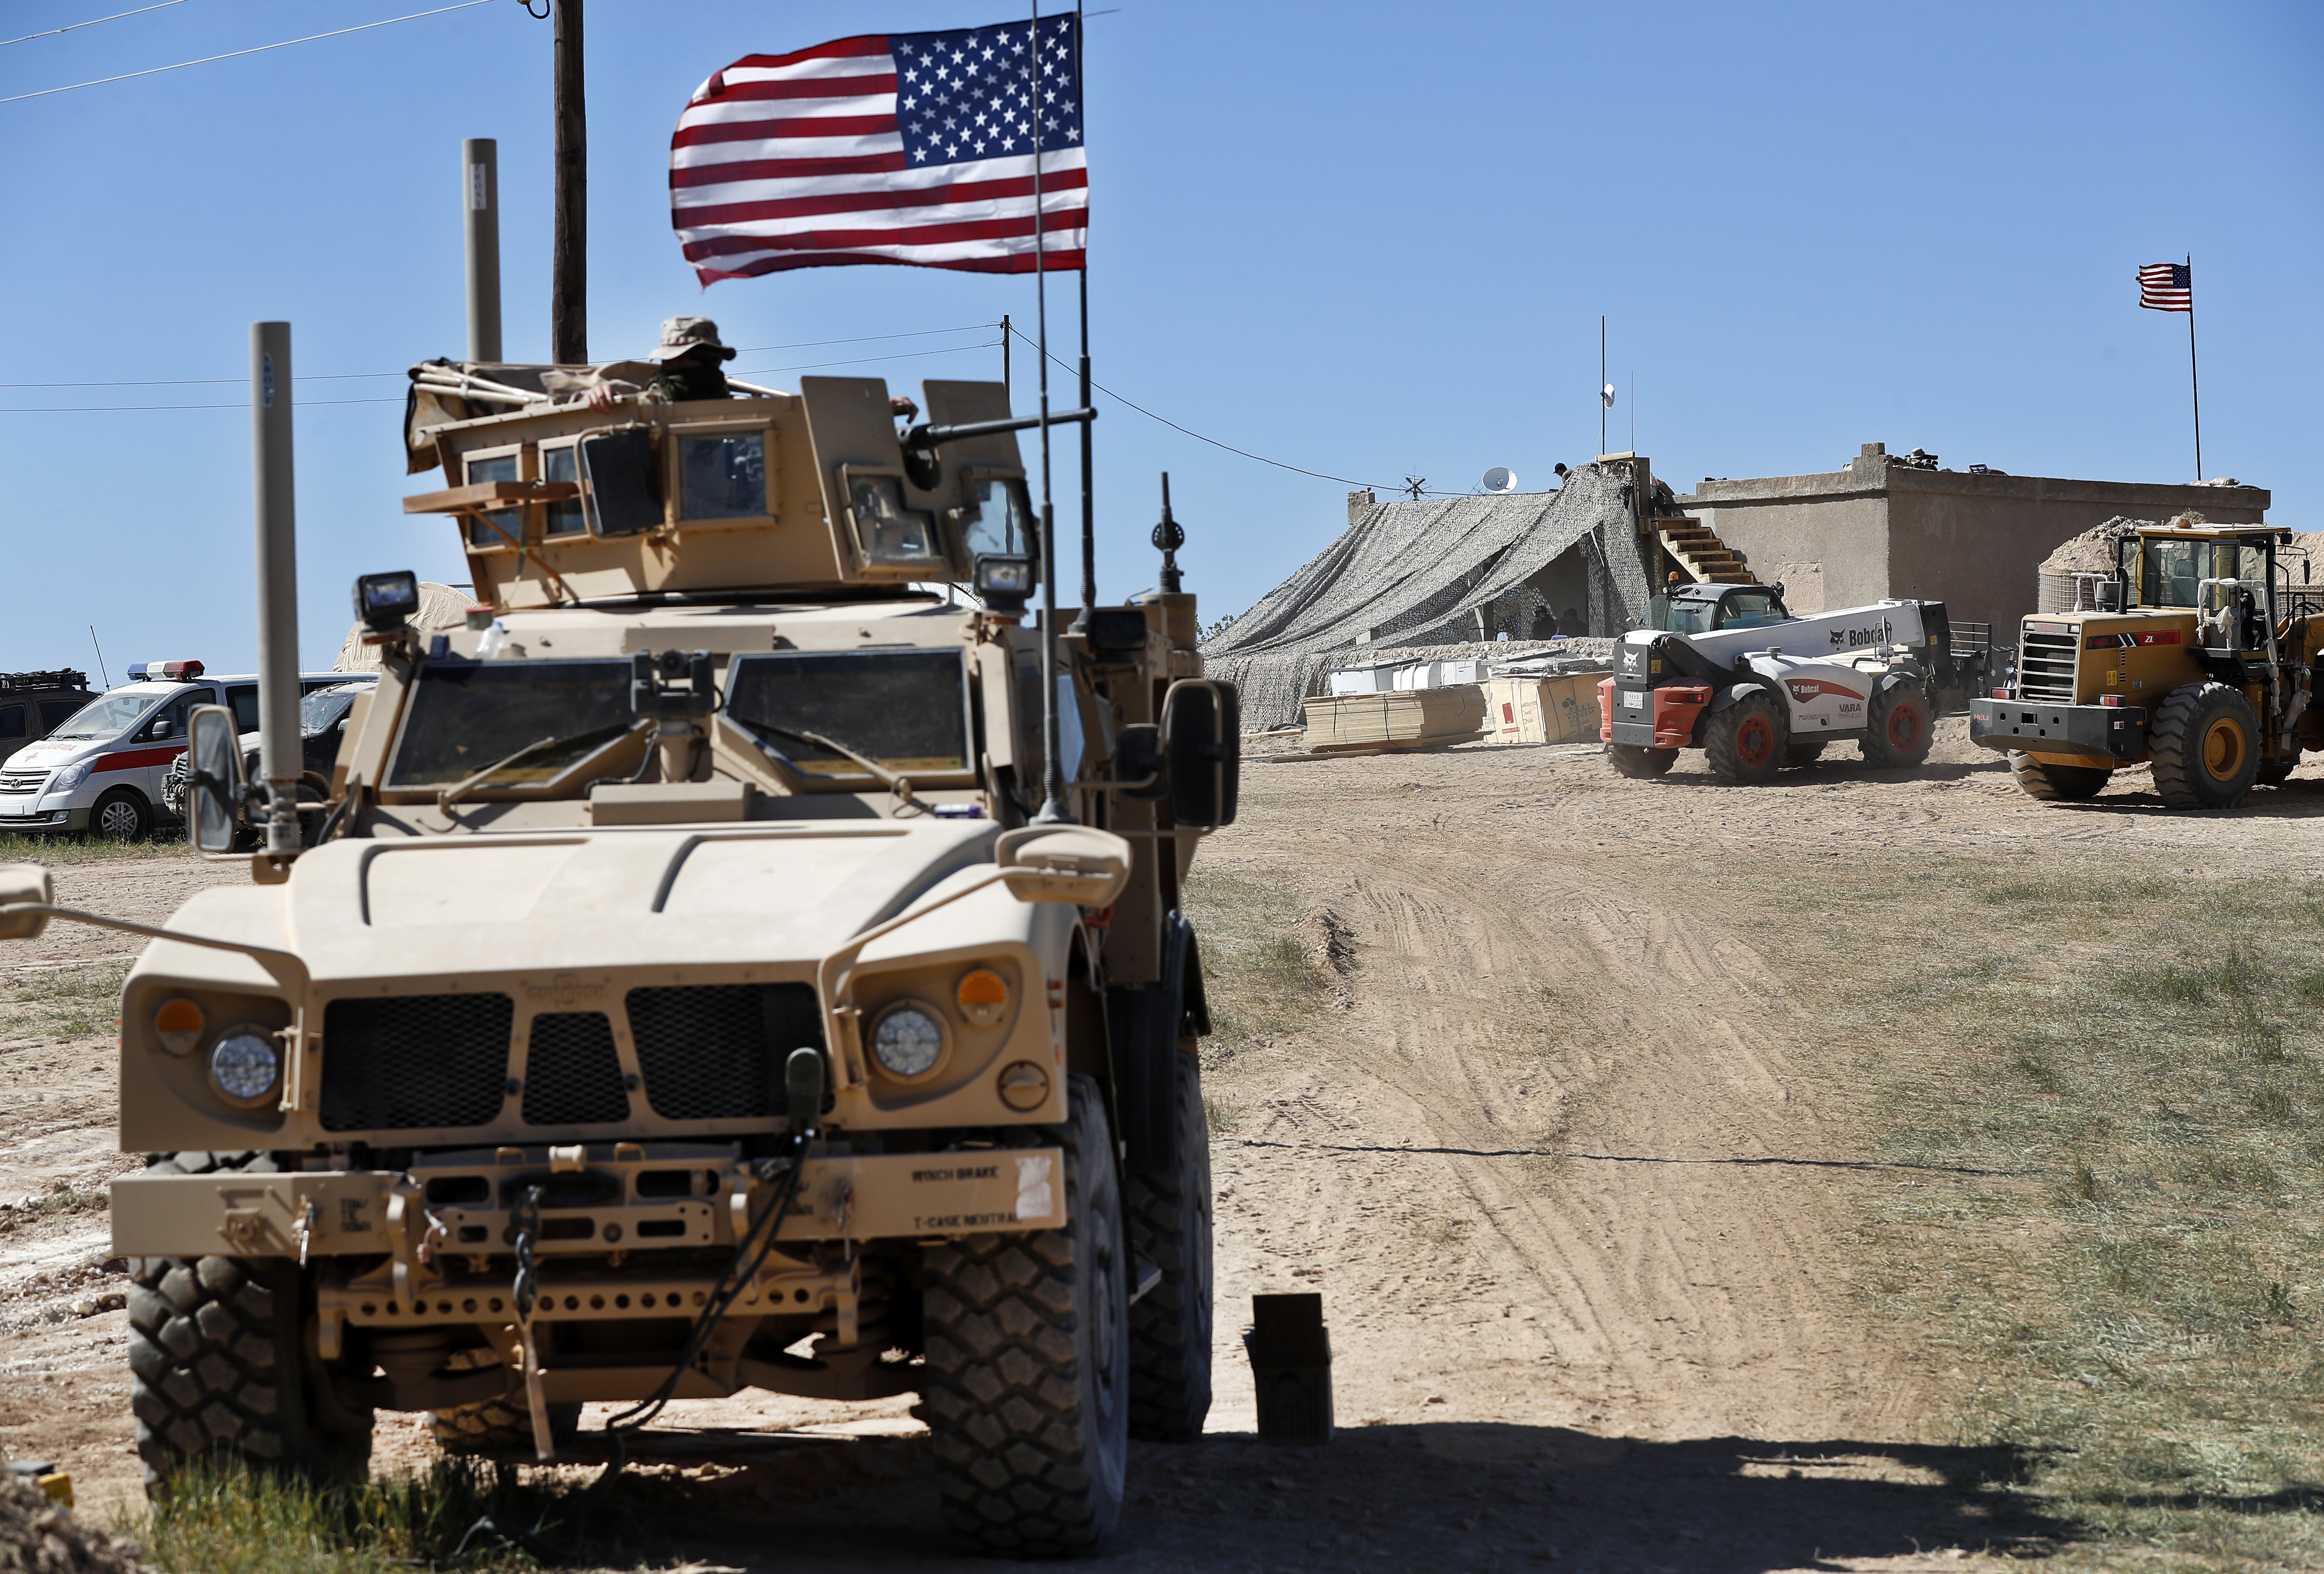 A US military base in Syria has been struck by rockets